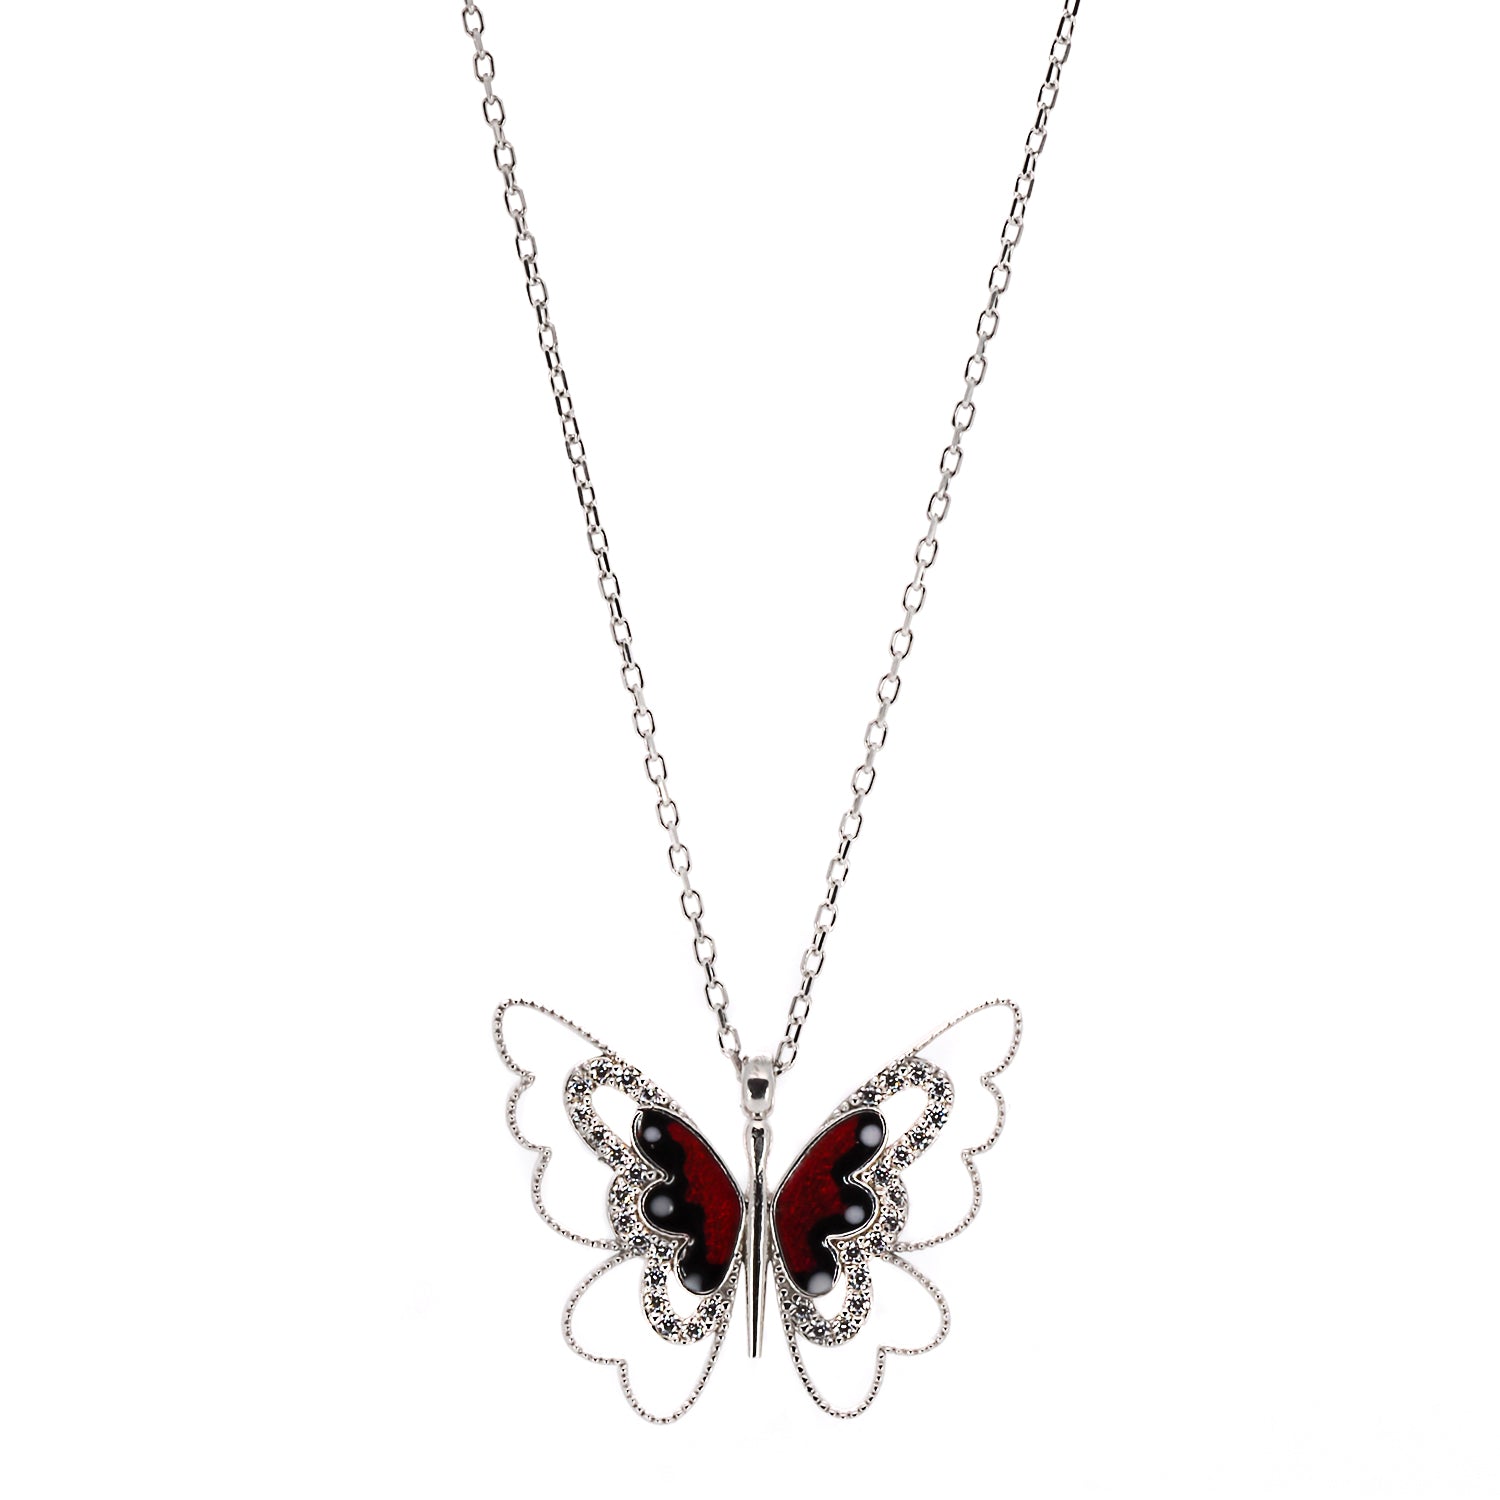 A close-up of the intricate red and black enamel design on the Sterling Silver Peace Red Butterfly Necklace.